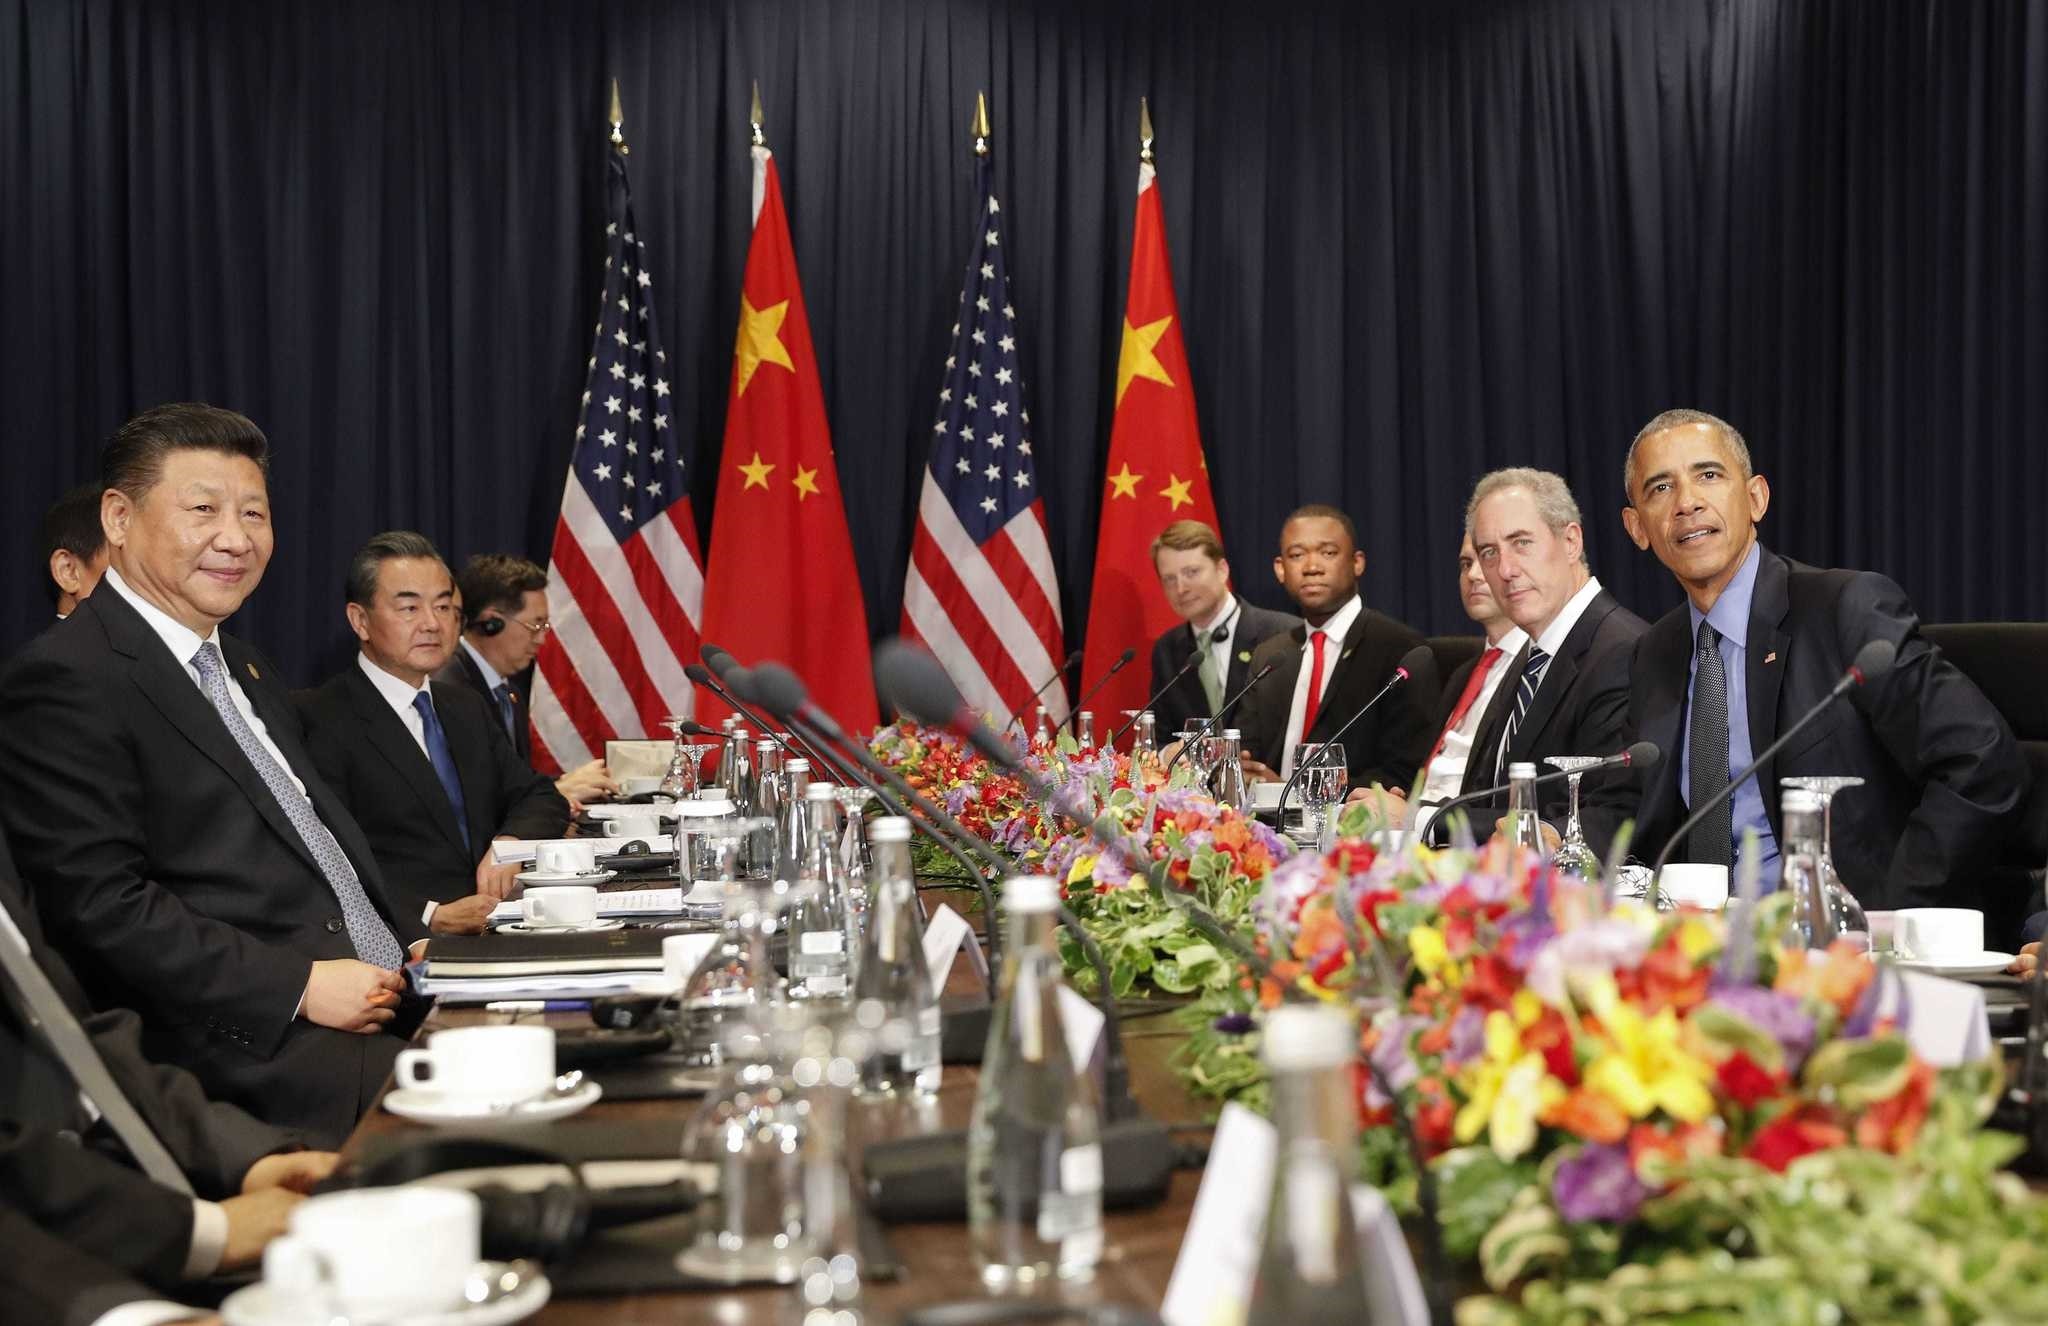 U.S. President Barack Obama (R) with Chinau2019s President Xi Jingping and members of their delegations, during their meeting as part of the Asia-Pacific Economic Cooperation (APEC) in Lima, Peru.